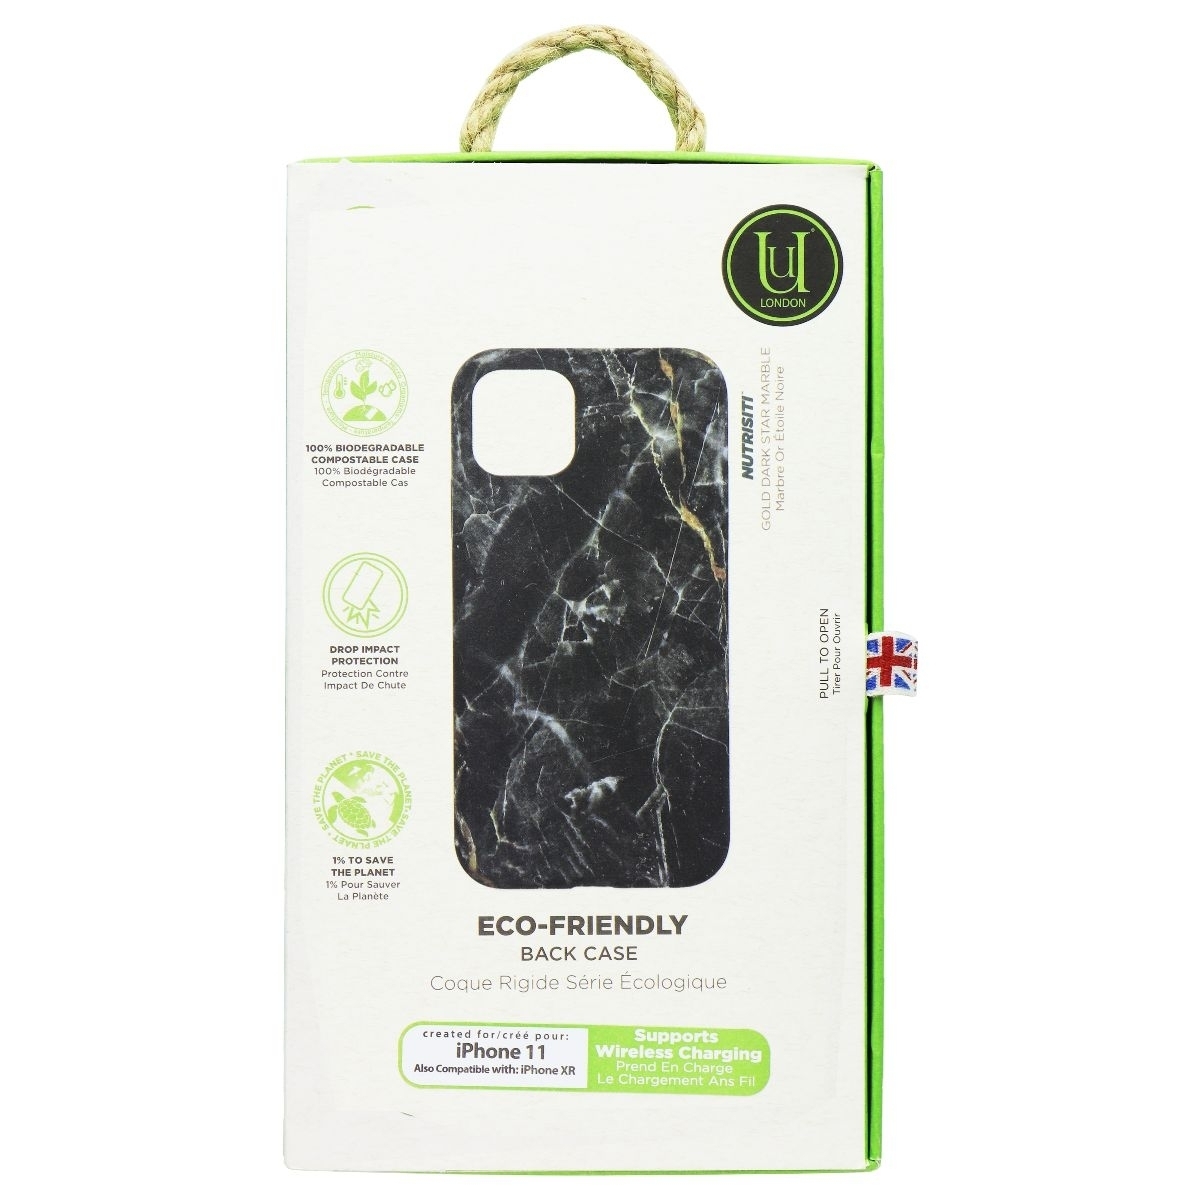 Unique London Eco-Friendly Back Case For Apple IPhone 11 And XR - Black Marble (Refurbished)